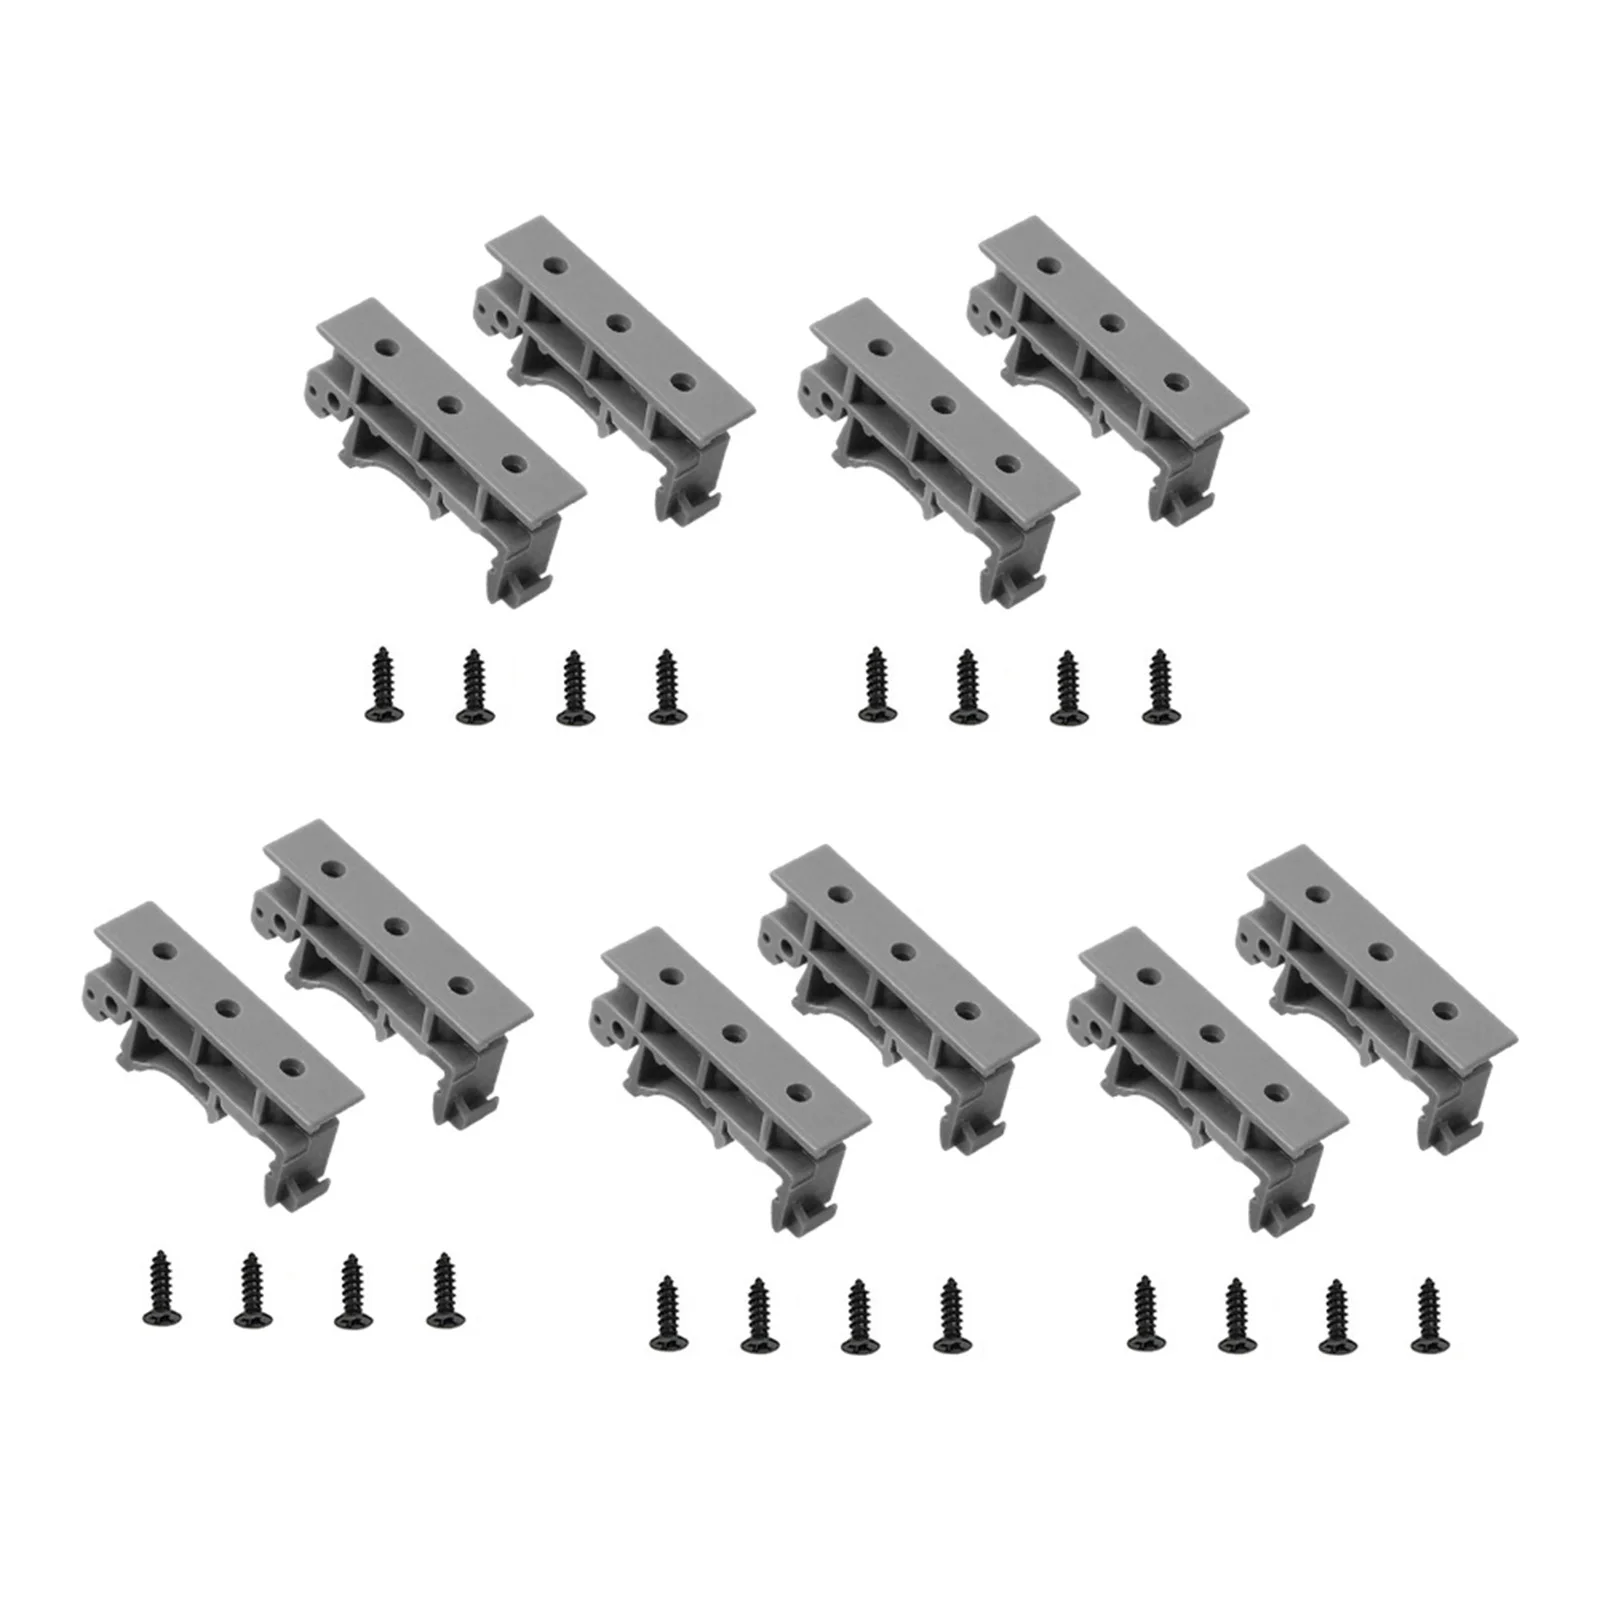 

Easy to Install Bracket Clips for Mounting Circuit Boards 5 Sets Premium PCB DIN C45 Rail Mount Adapter (35mm)